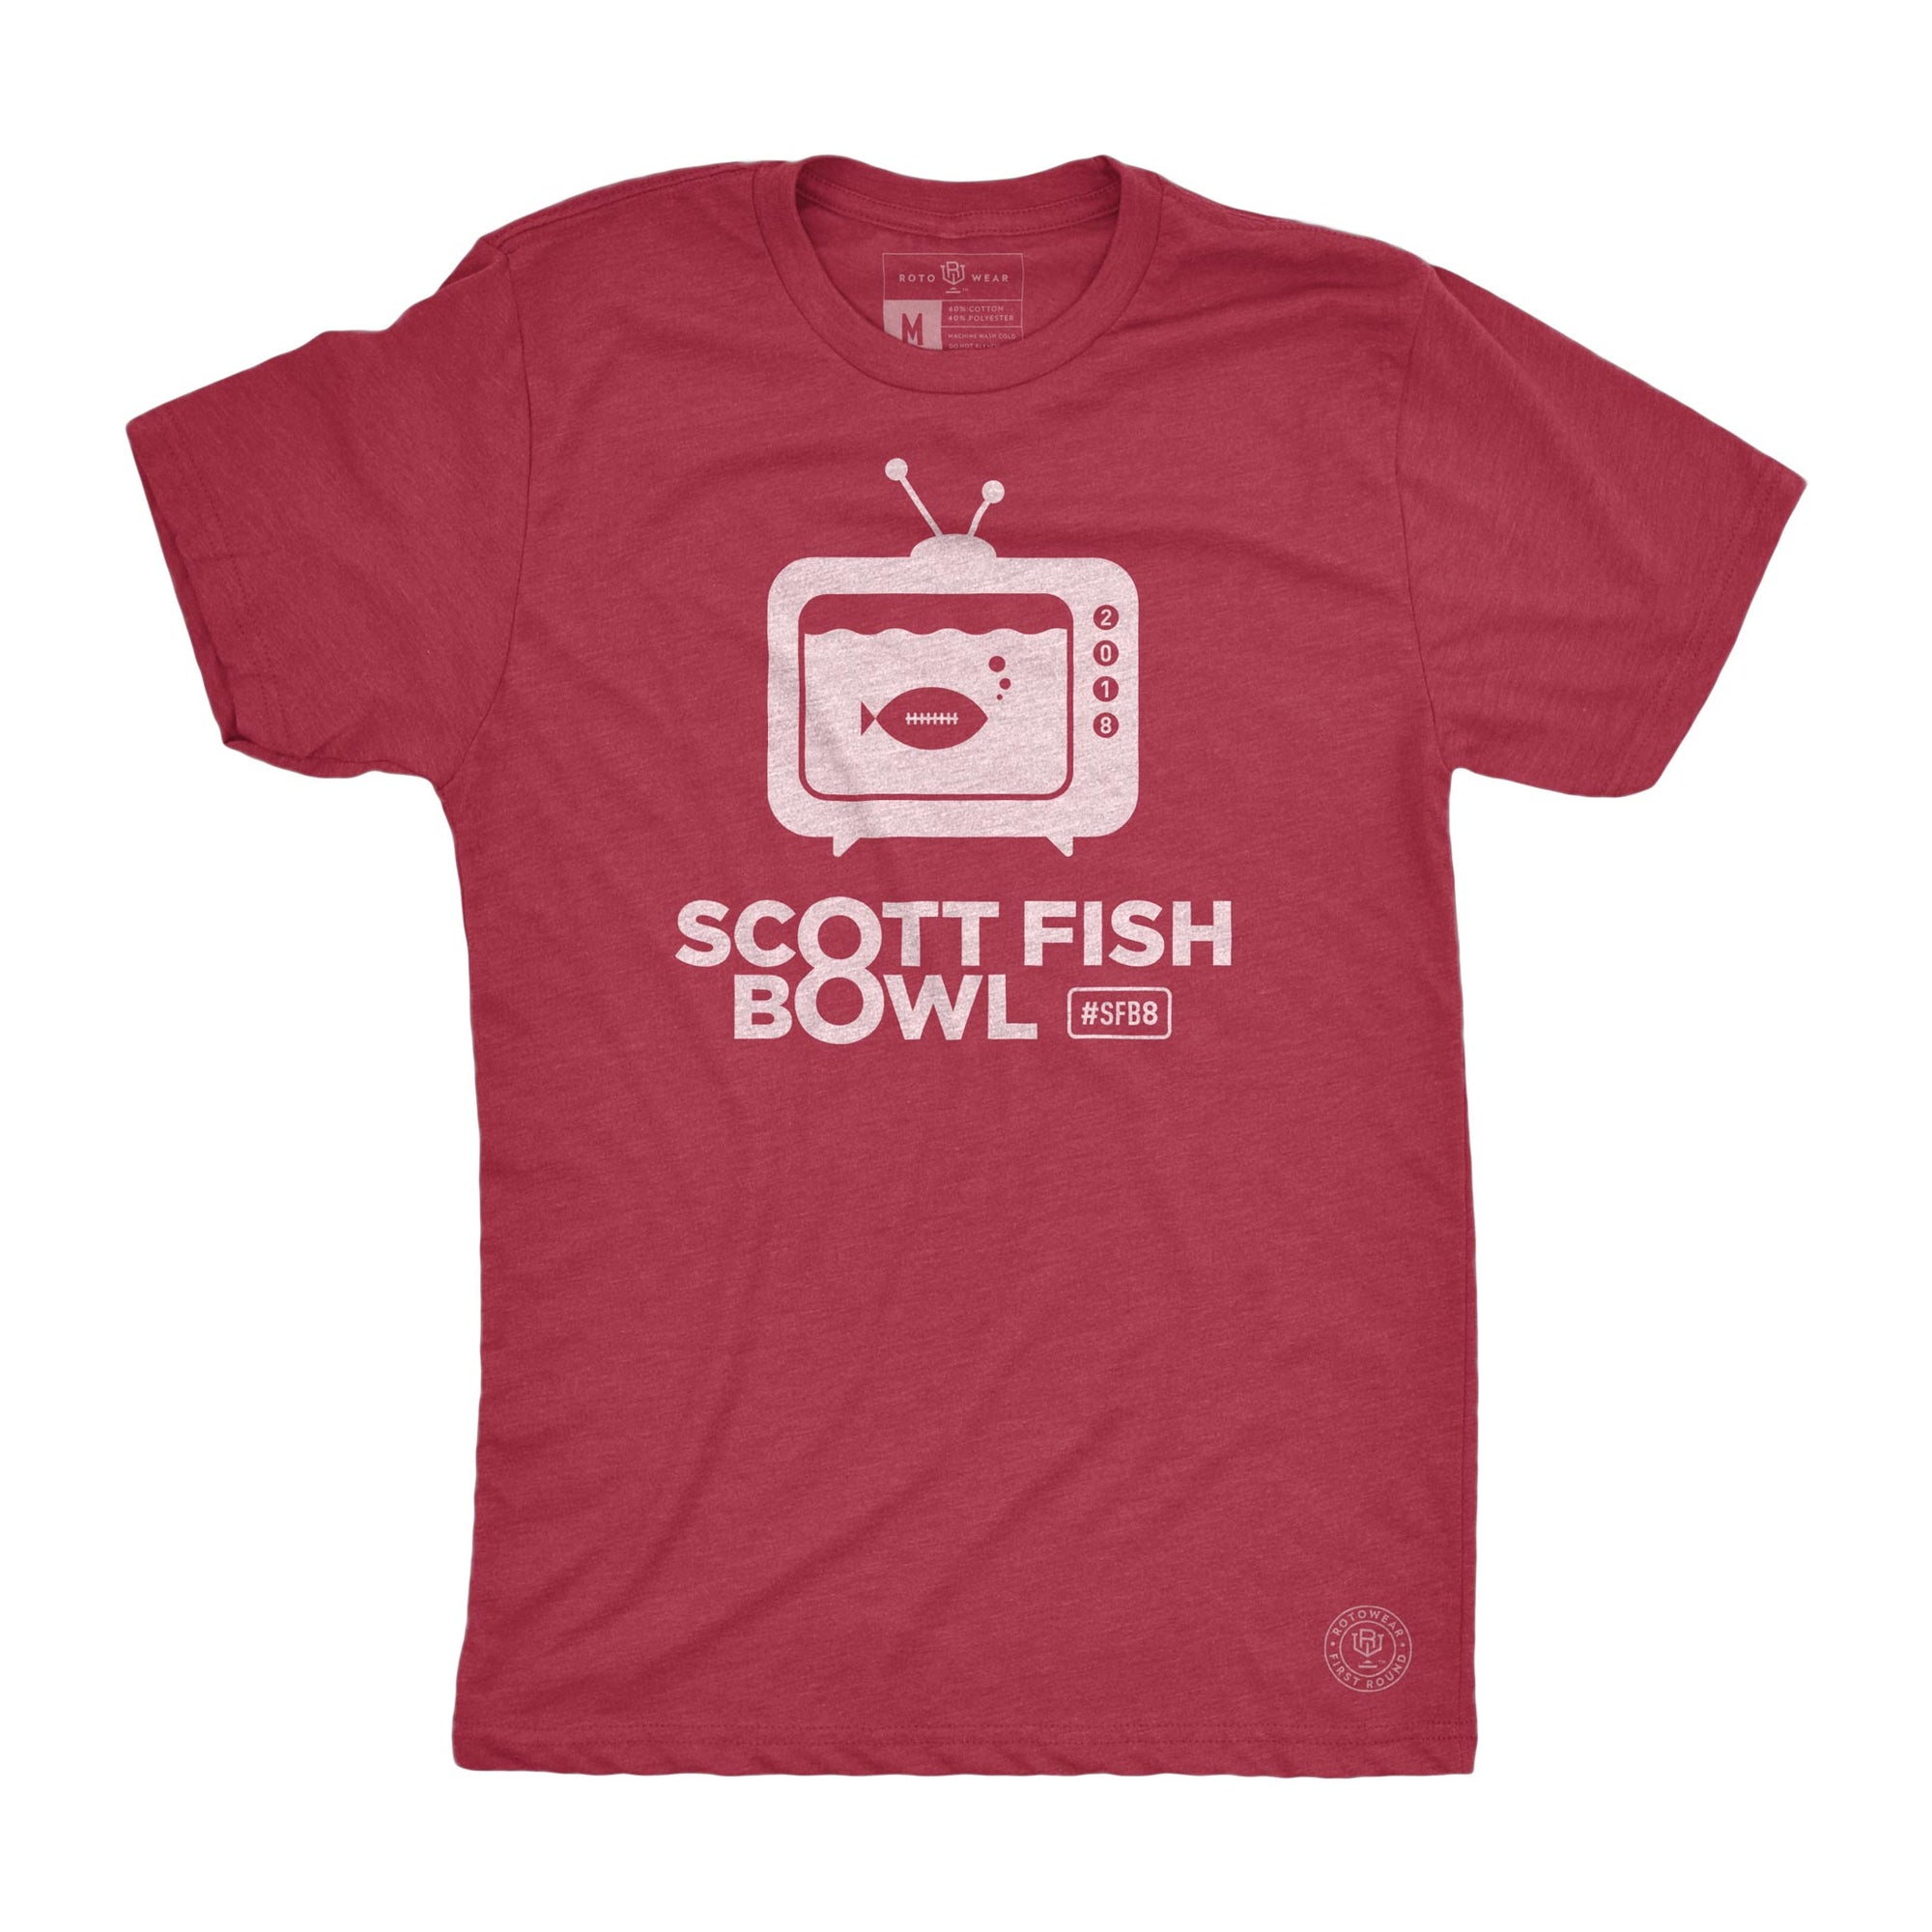 RotoWear’s Scott Fish Bowl men’s t-shirt for fantasy football managers is the official shirt of SFB8